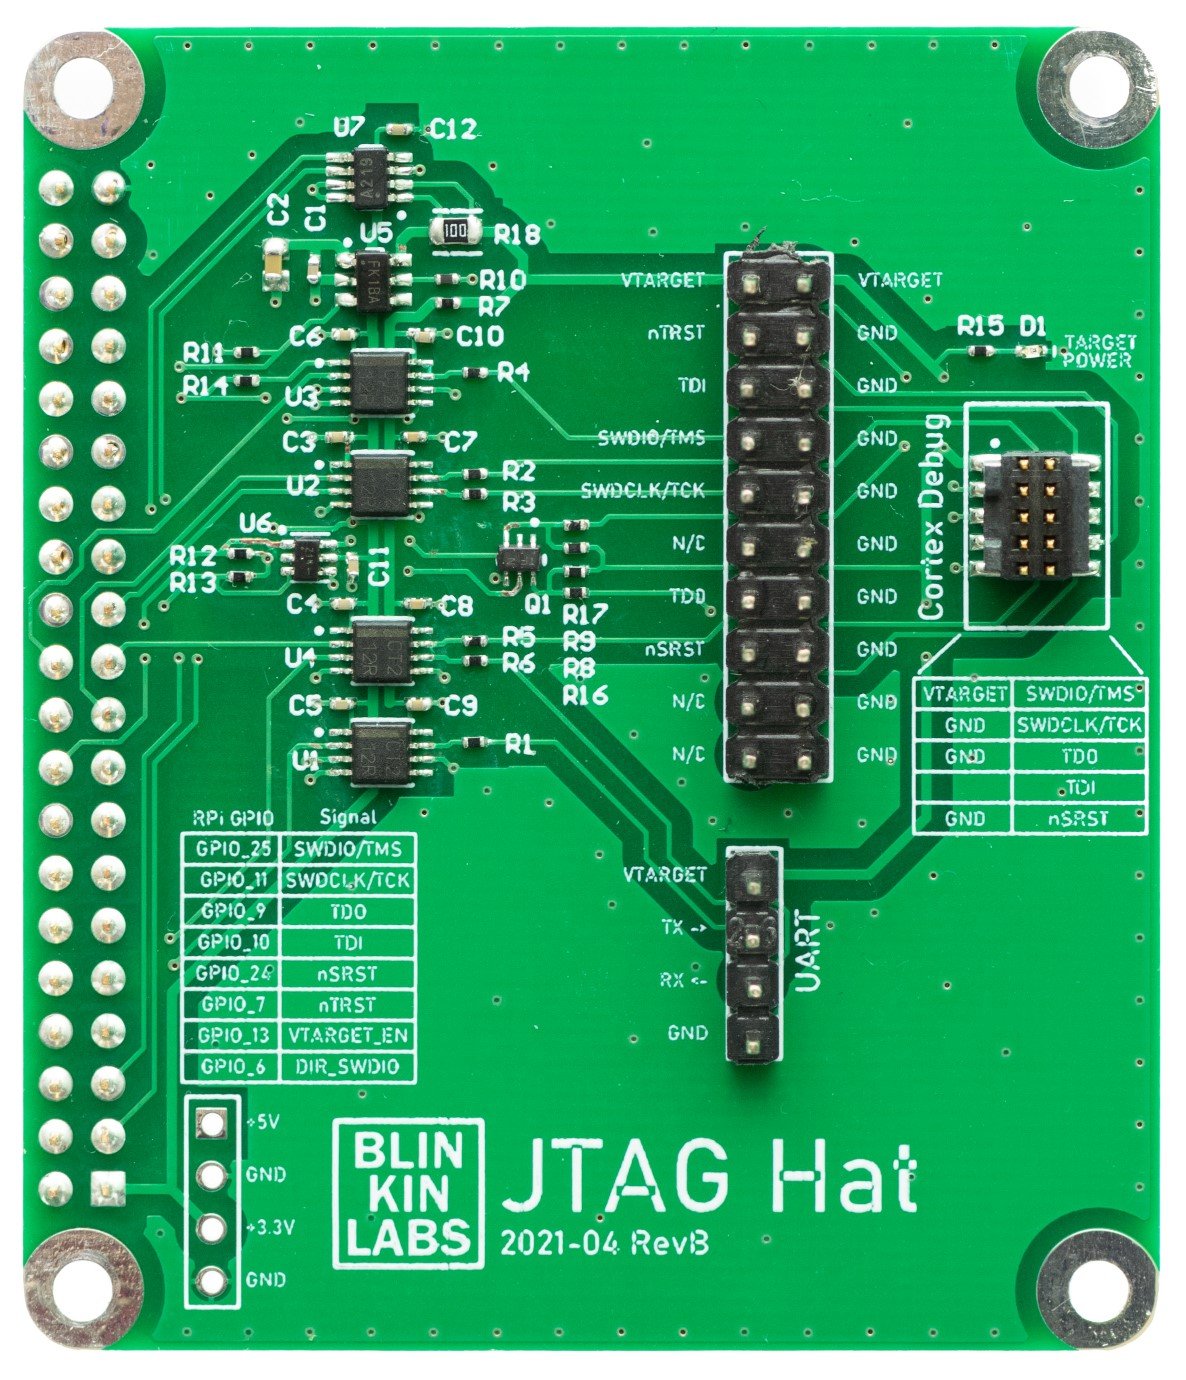 Top view of the JTAG hat PCB